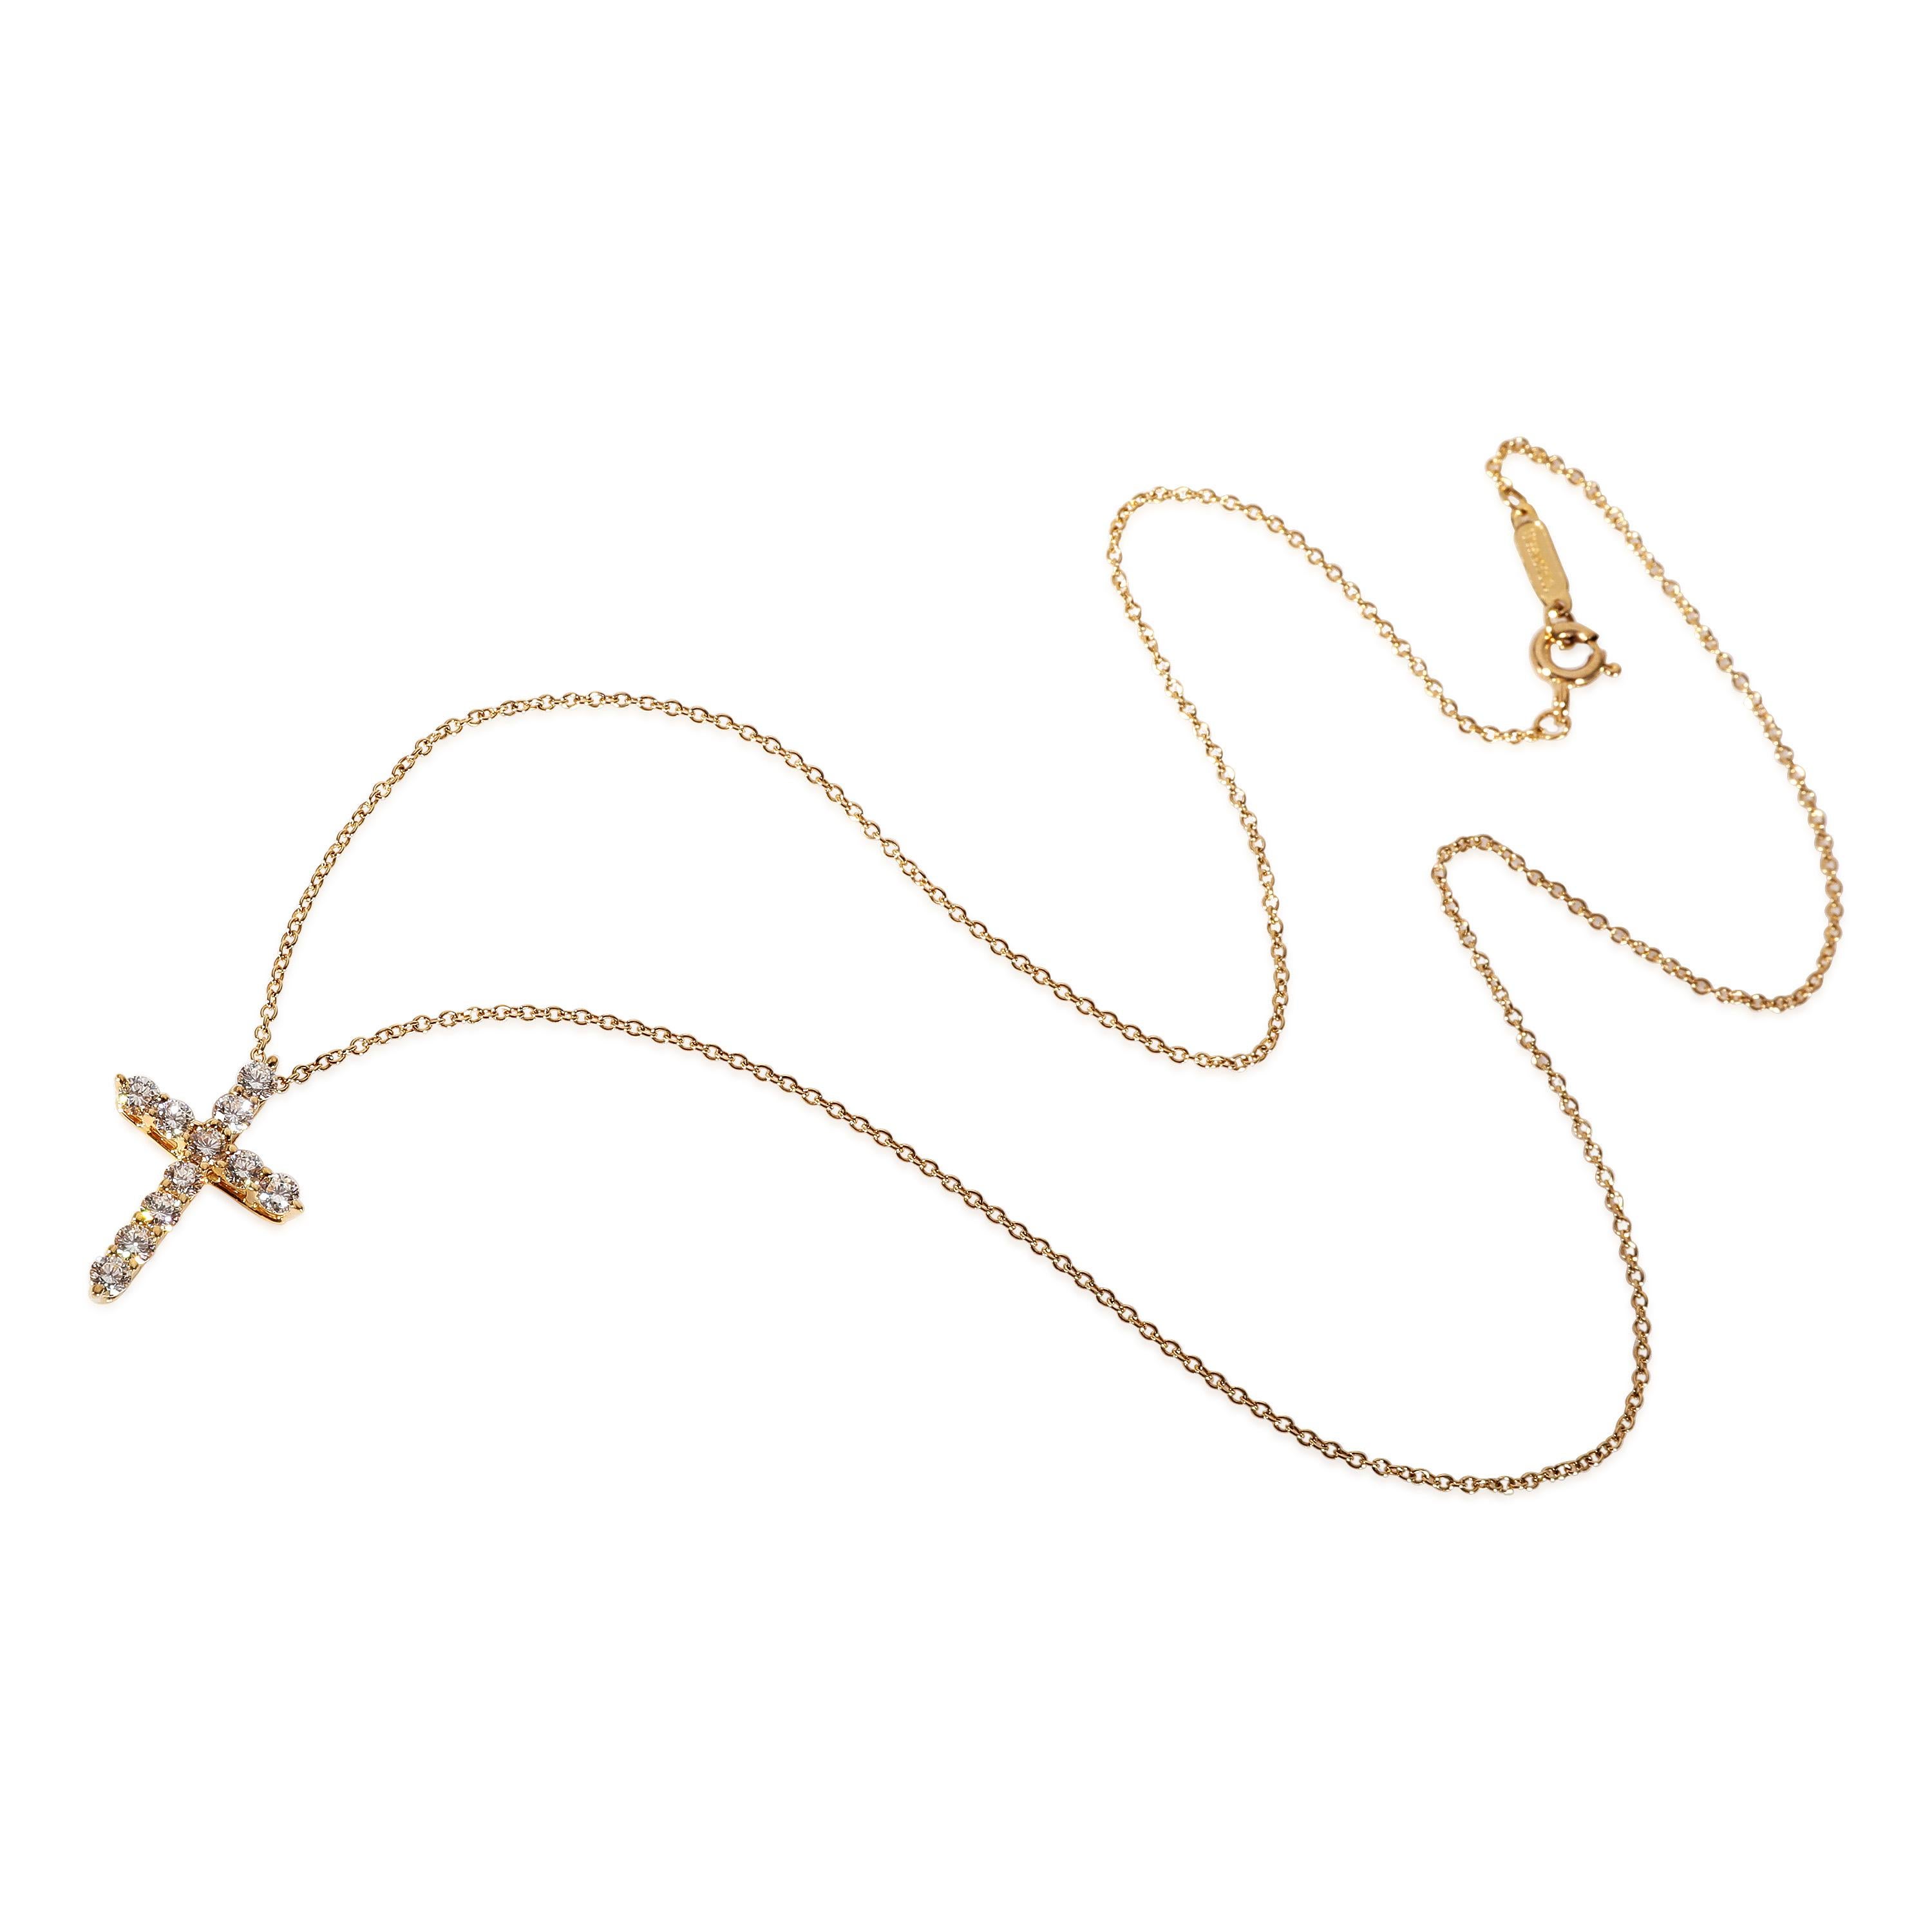 Tiffany & Co. Diamond Cross Pendant in 18k Yellow Gold 0.5 CTW

PRIMARY DETAILS
SKU: 121335
Listing Title: Tiffany & Co. Diamond Cross Pendant in 18k Yellow Gold 0.5 CTW
Condition Description: Retails for 3300 USD. In excellent condition and